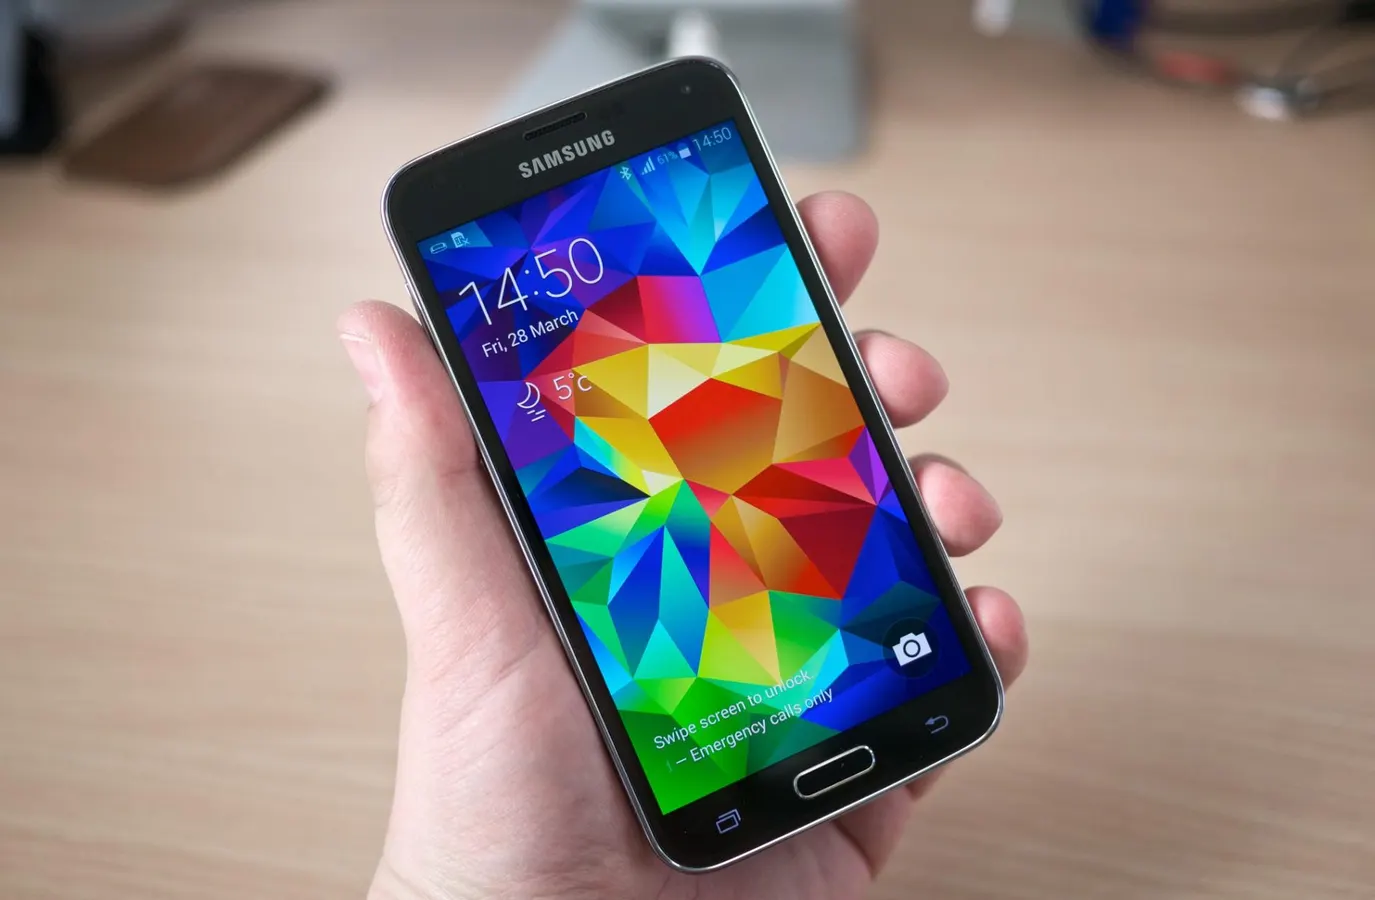 what-phone-plans-can-i-use-with-a-samsung-galaxy-s5